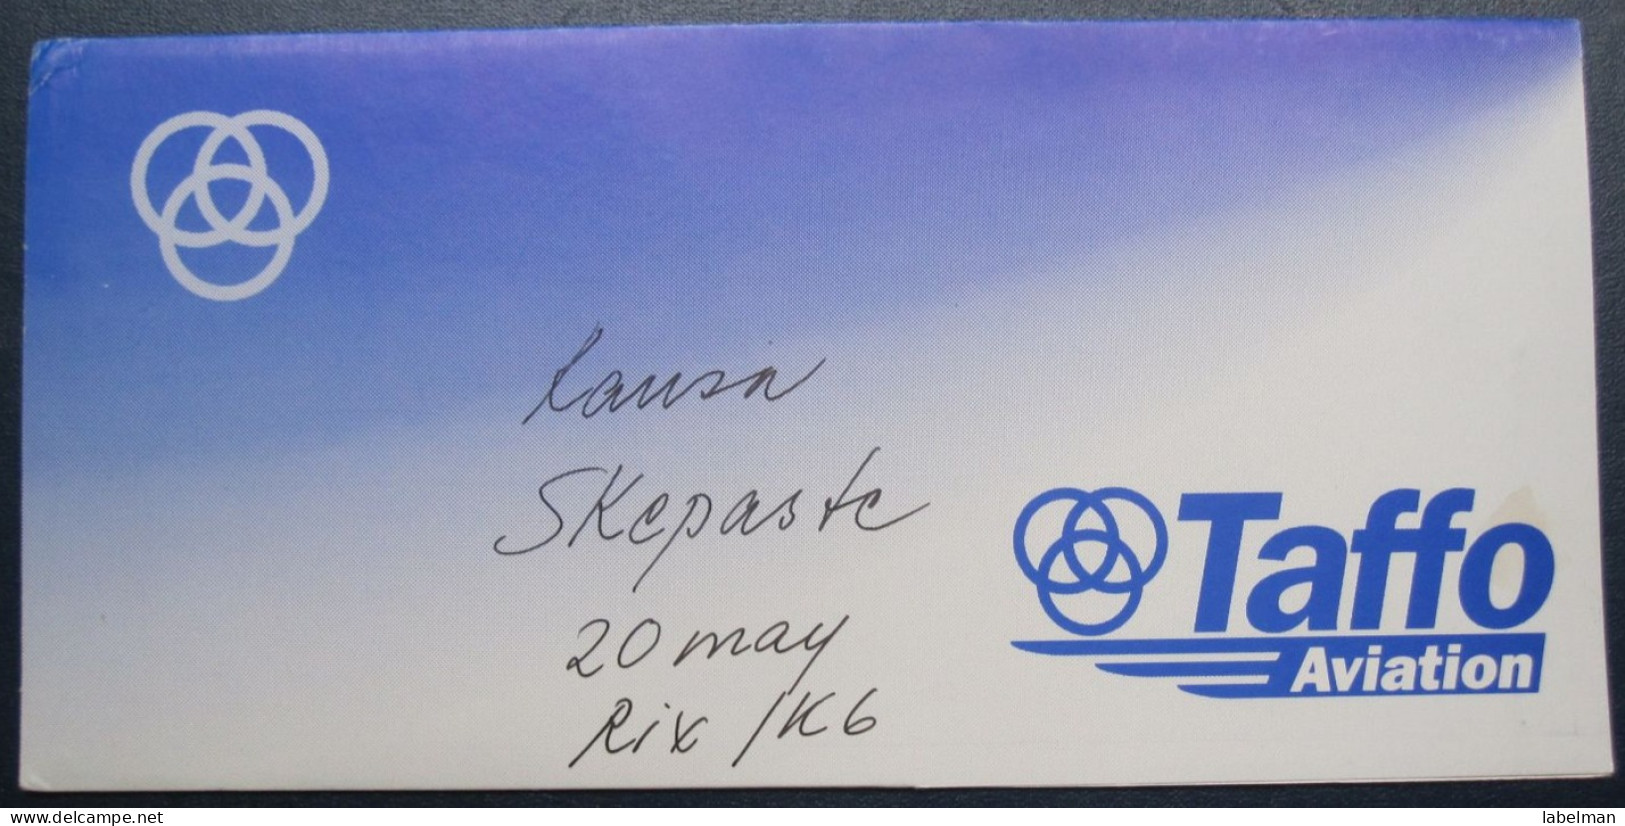 TAFFO AVIATION SWEDEN AIRWAYS AIRLINE TICKET HOLDER BOOKLET VIP TAG LUGGAGE BAGGAGE PLANE AIRCRAFT AIRPORT - Welt